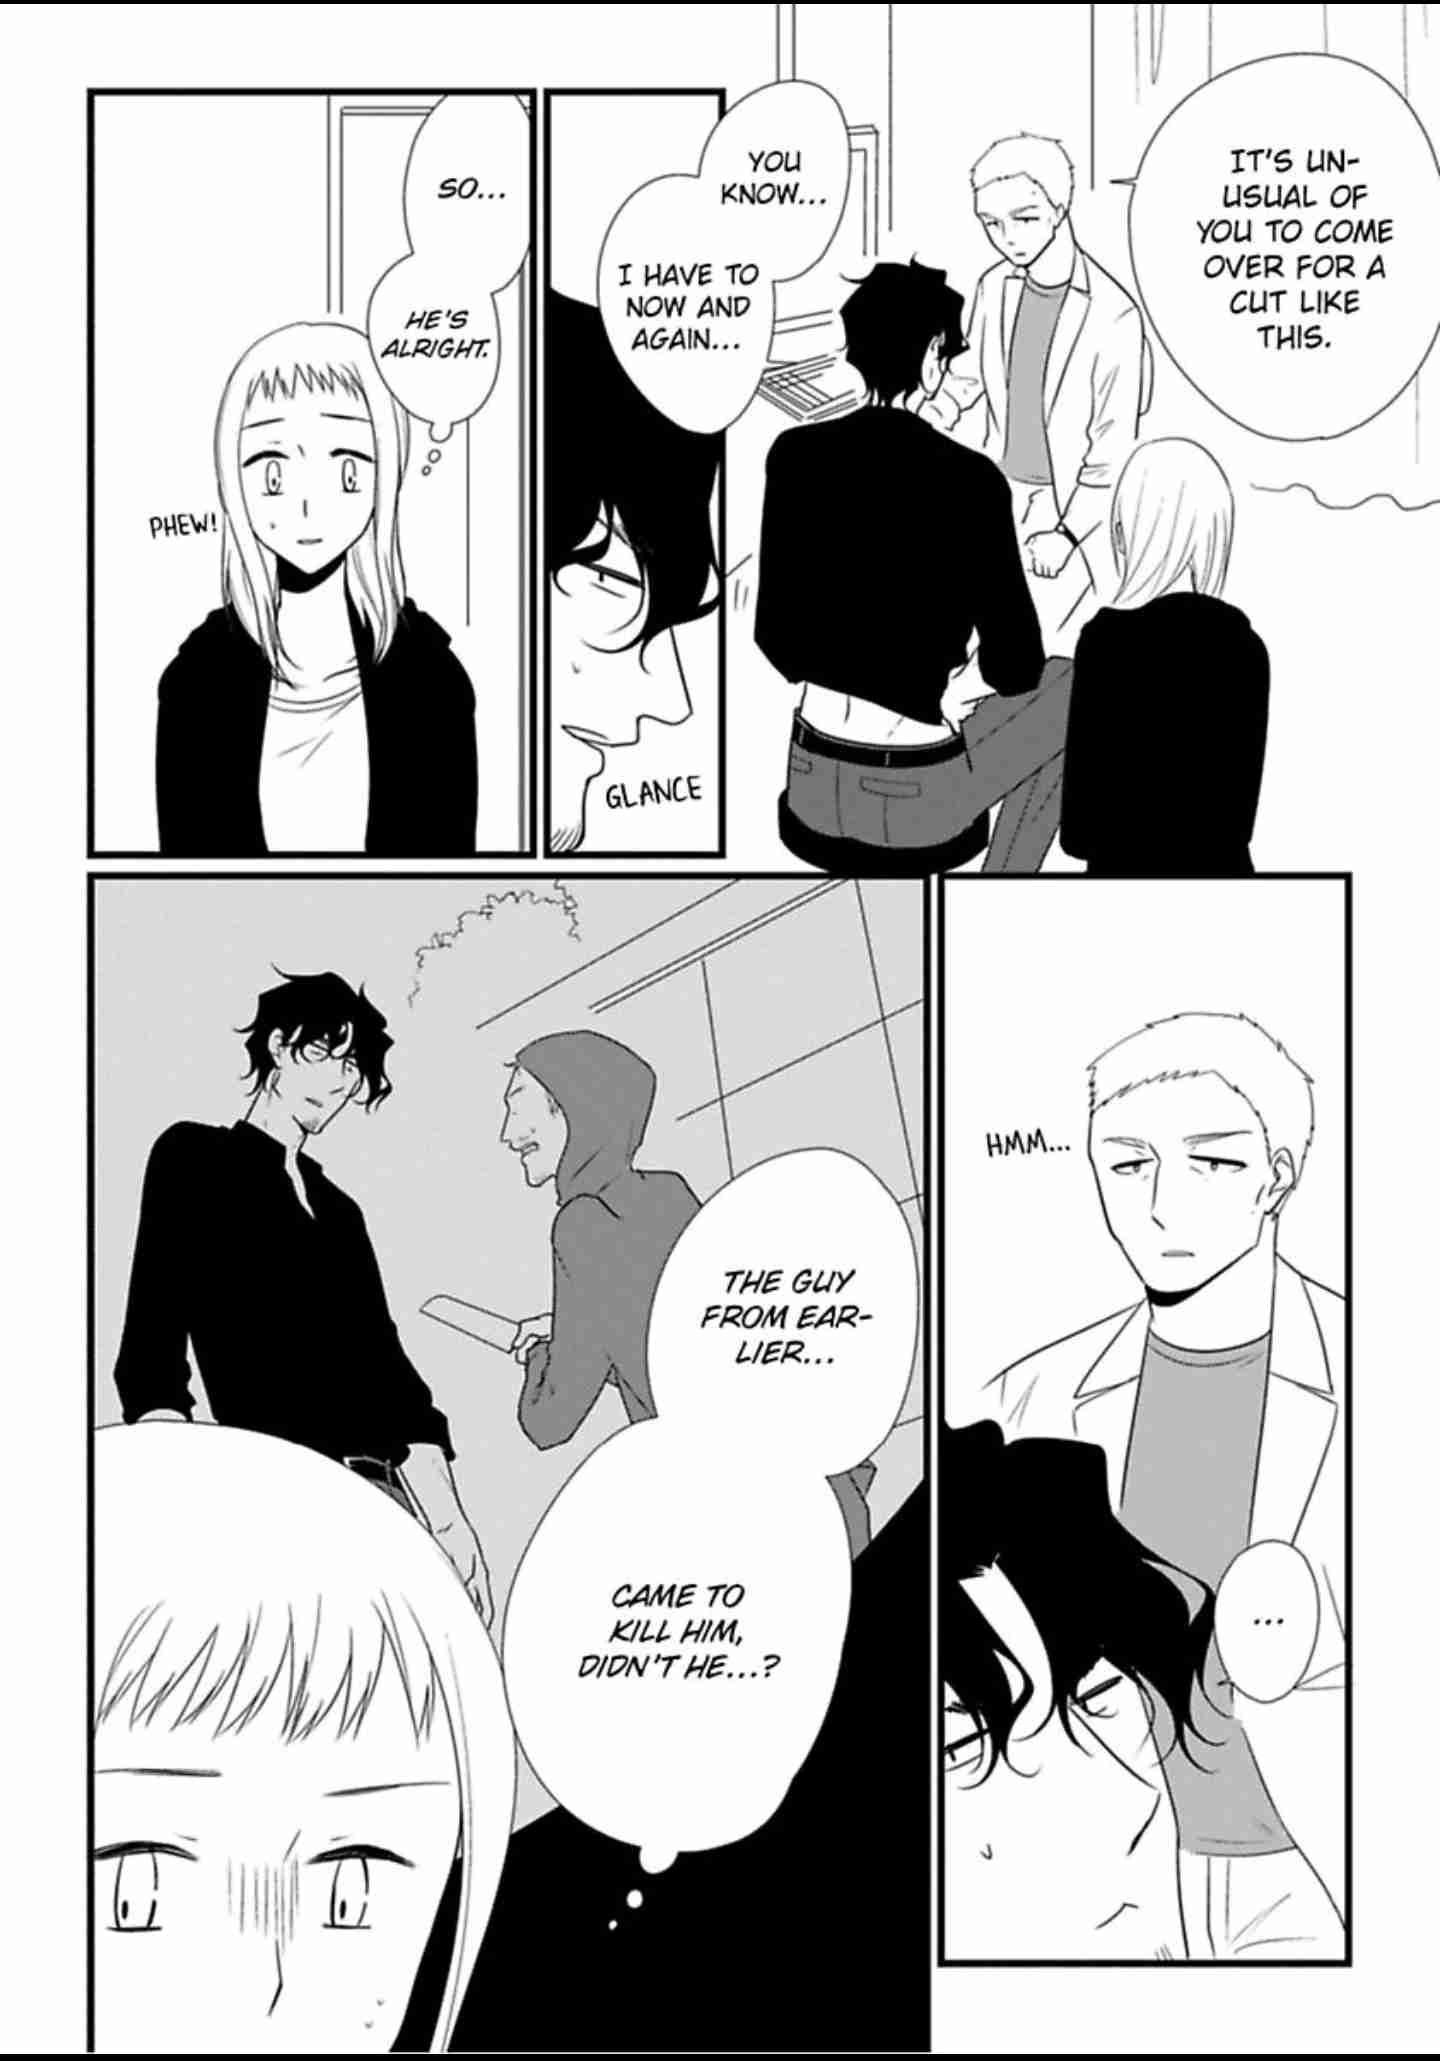 The Artist and the Beast Ch.21